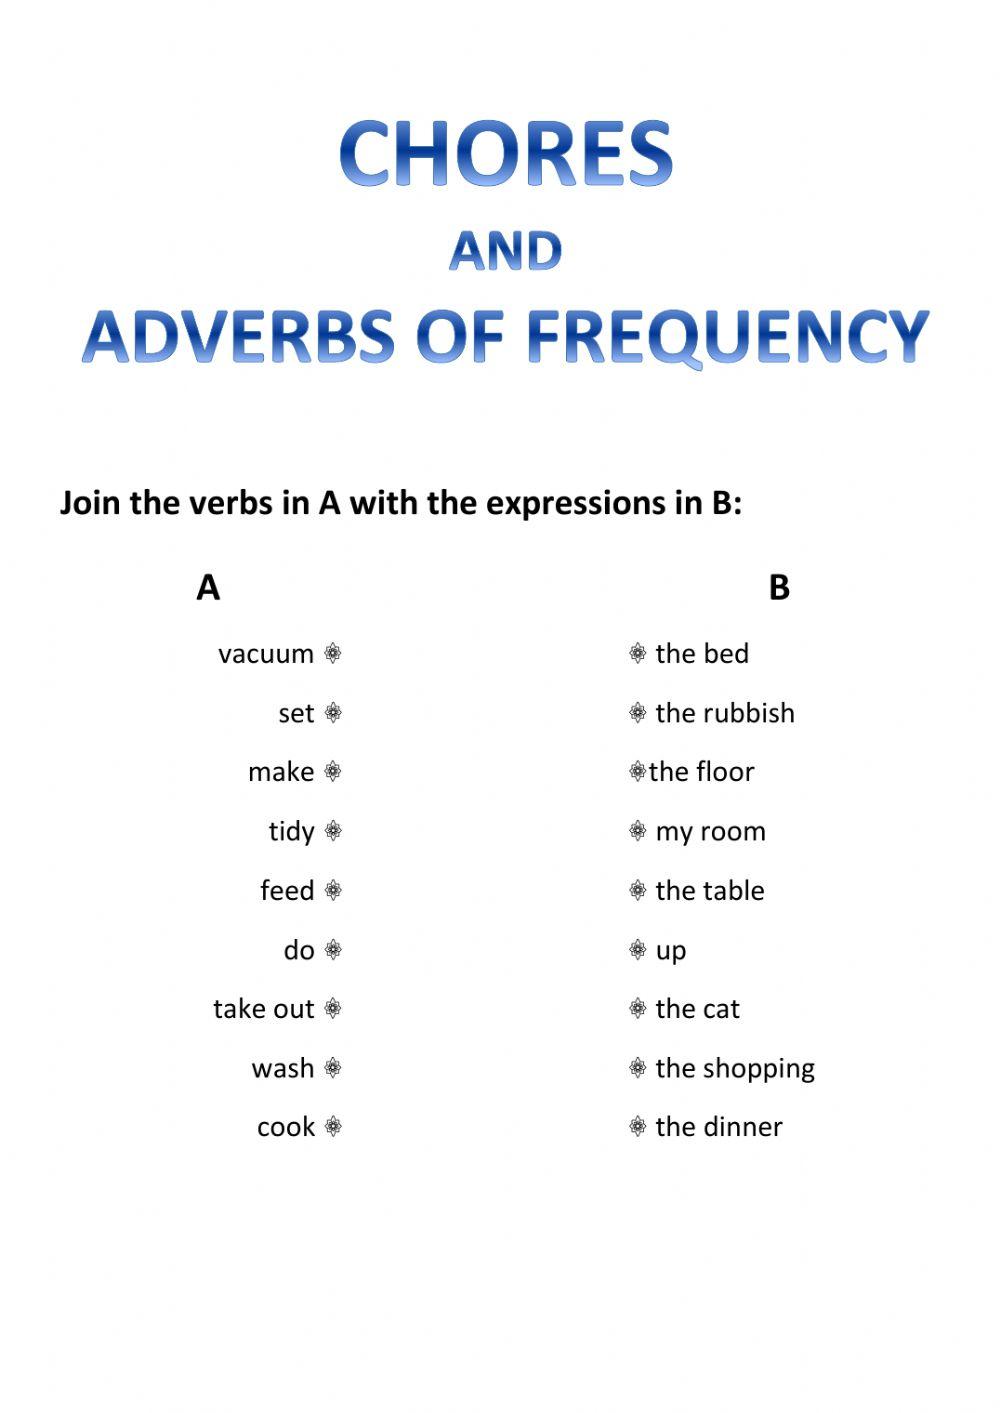 Chores and adverbs of frequency